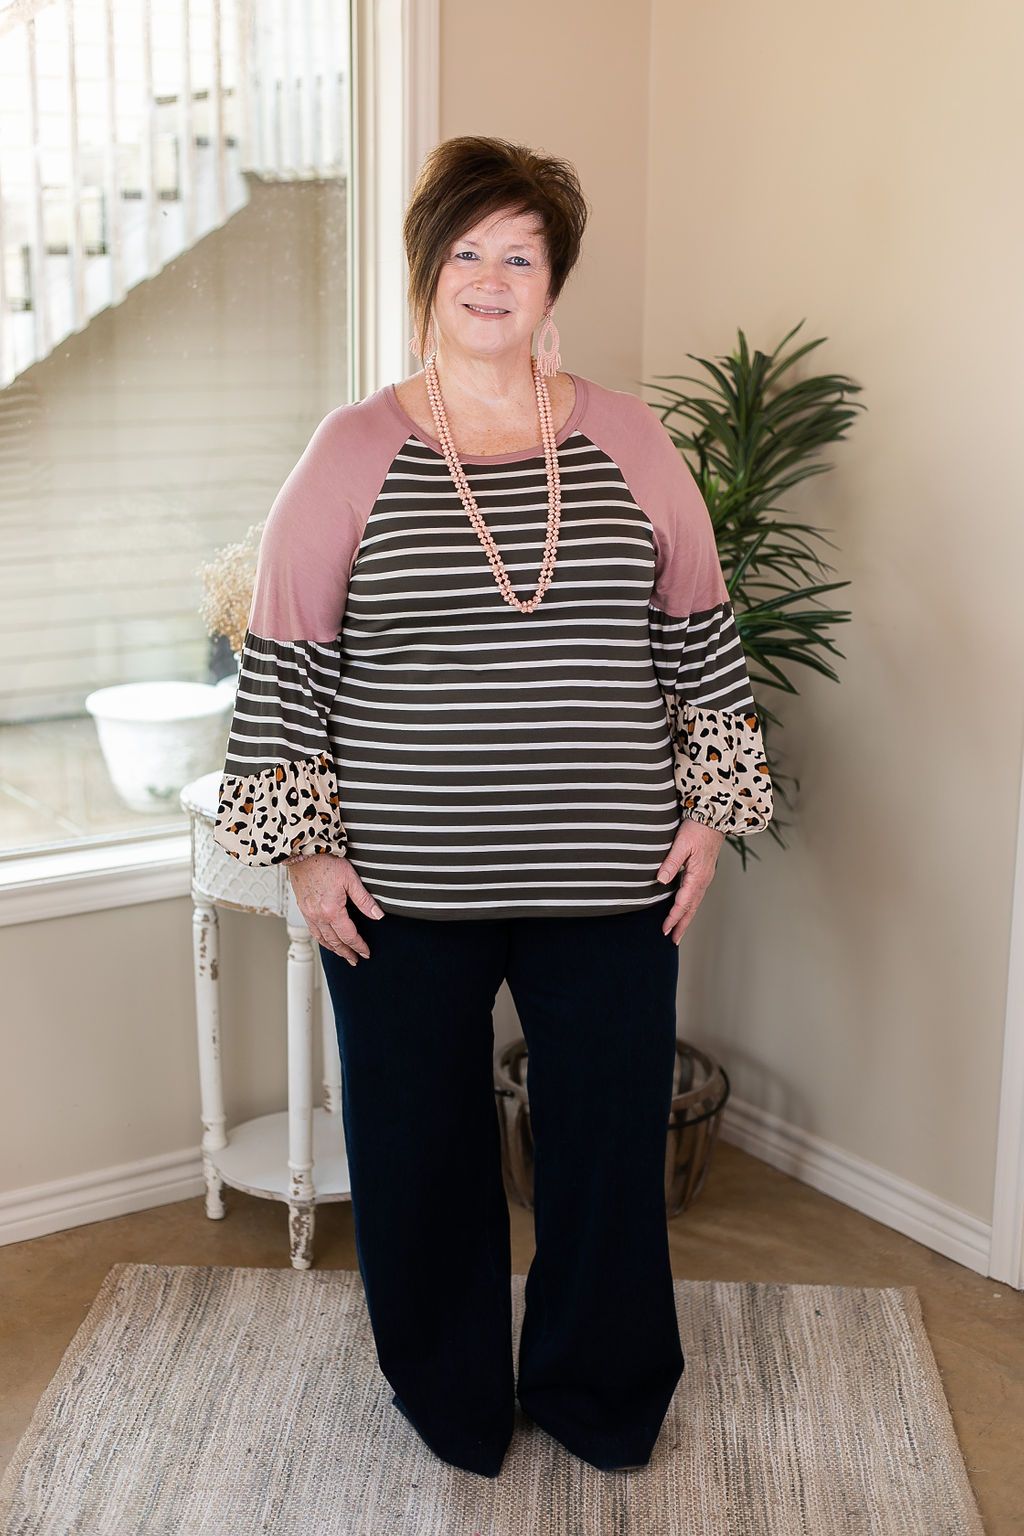 No Looking Back Striped Top with Multi Print Puff Sleeves in Olive Green and Pink